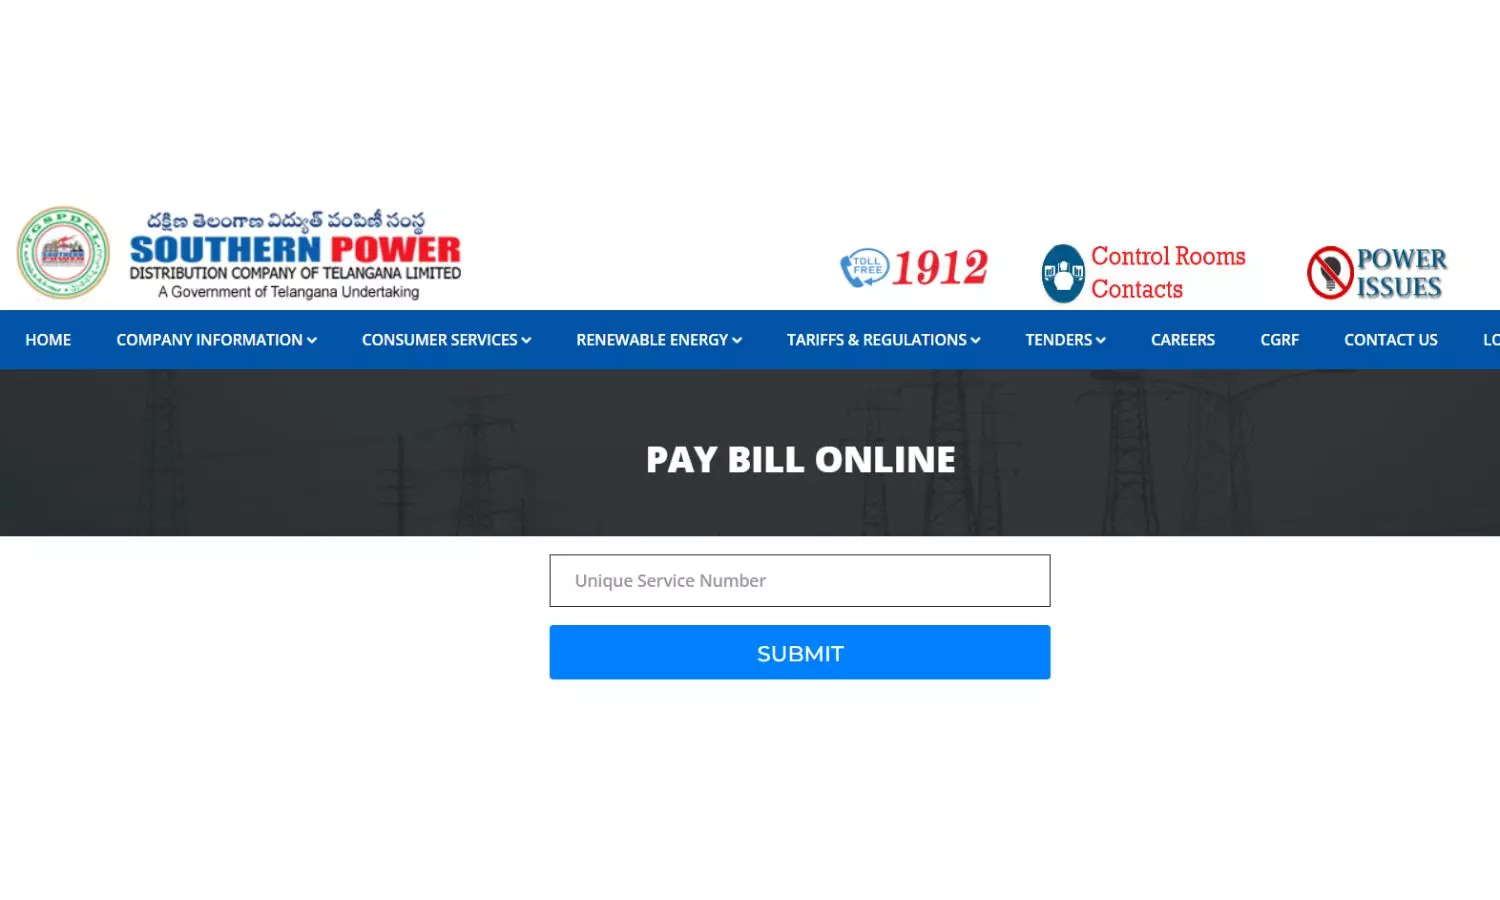 No Electricity Bill Payment on UPI Apps as per RBI, Says TGSPDCL